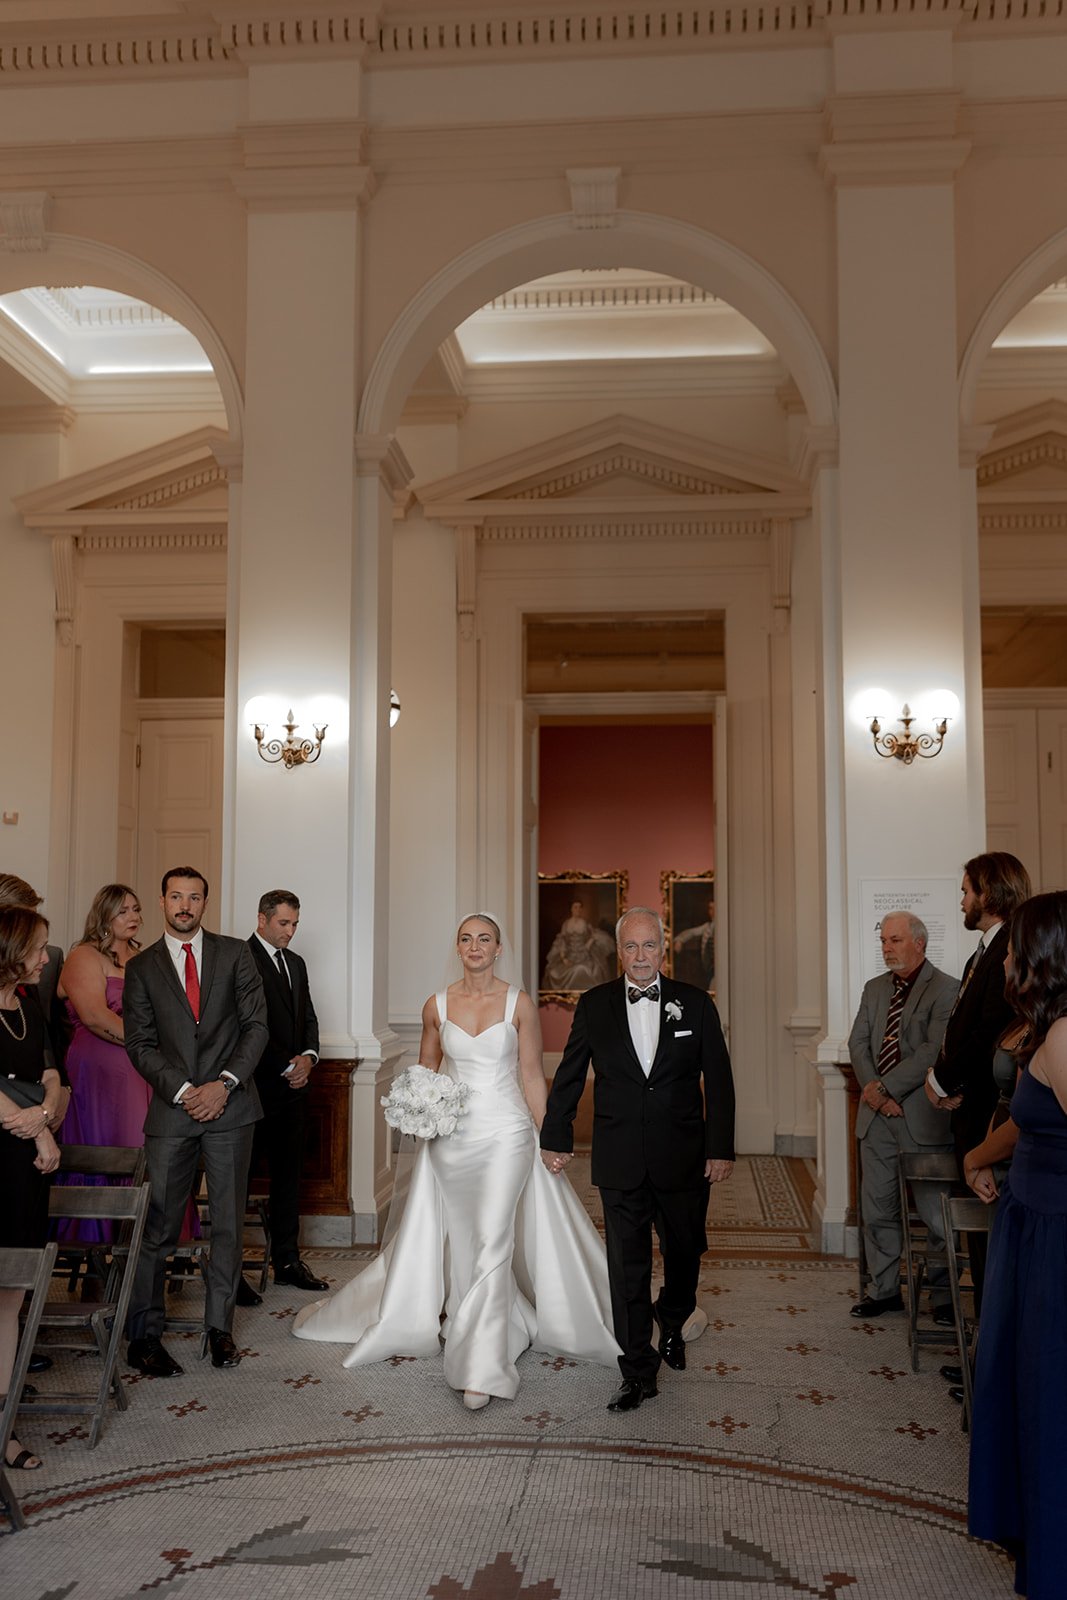 Father is walking bride down the aisle at gibbes museum wedding